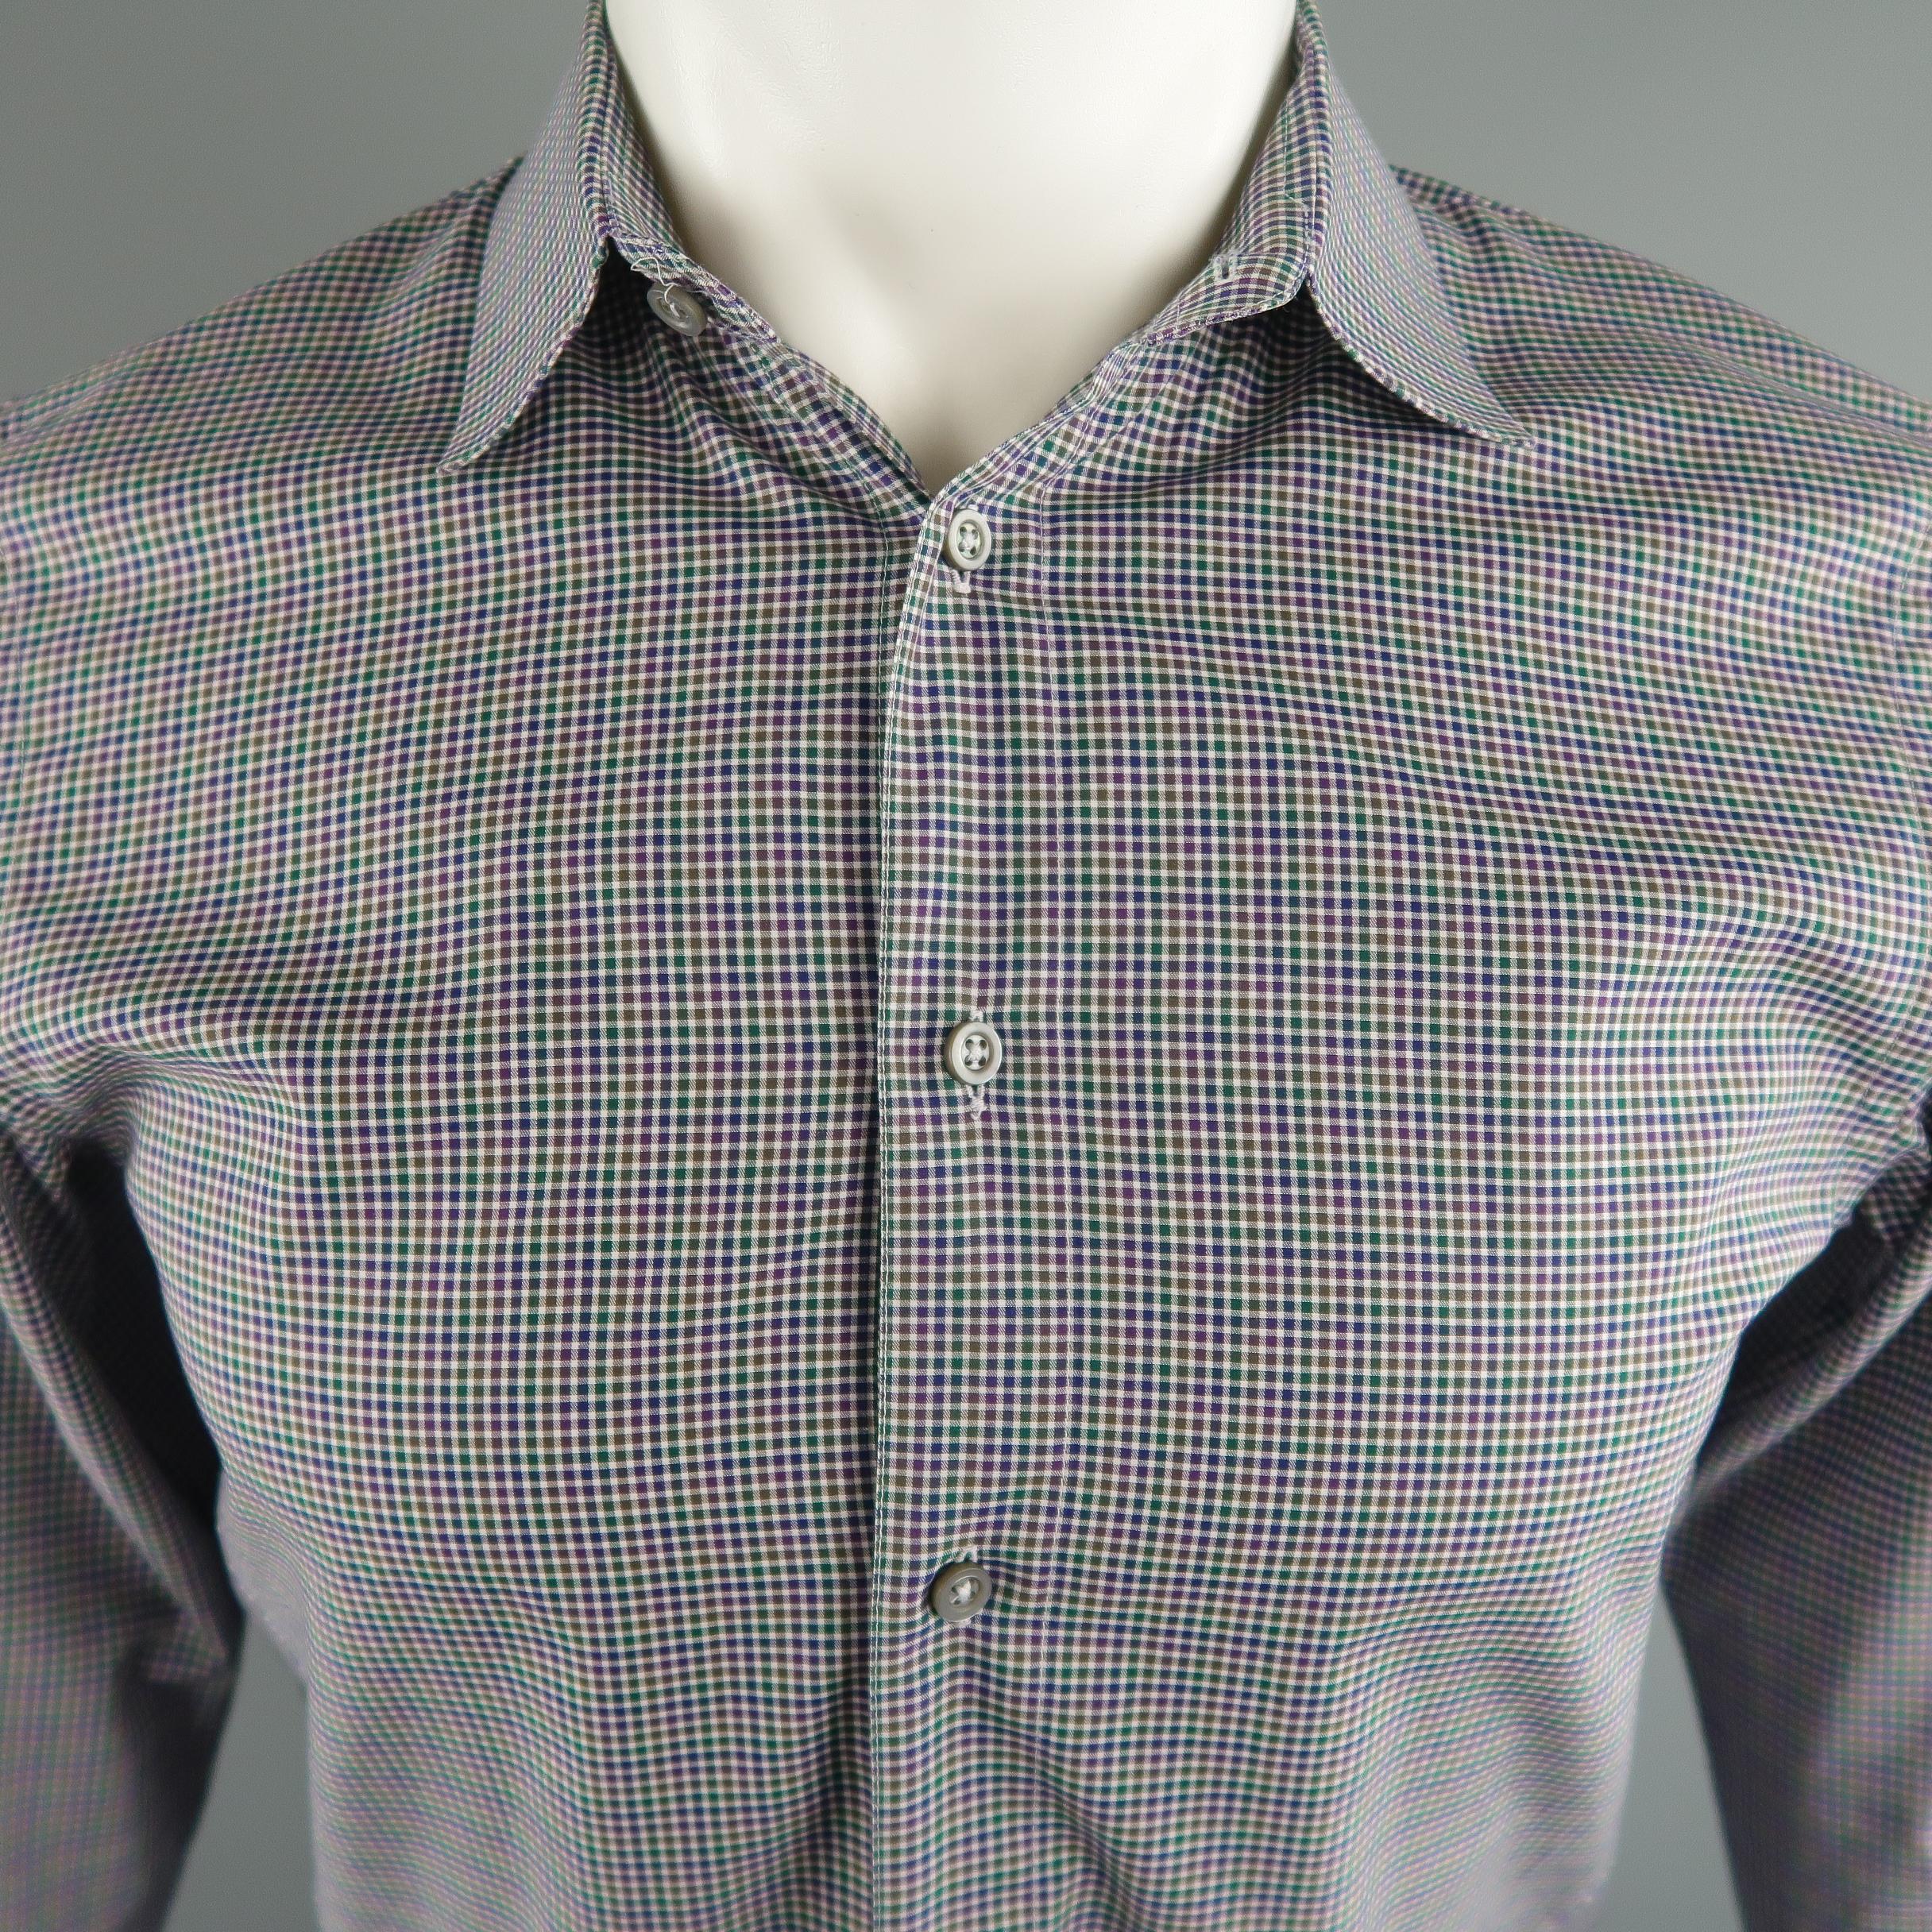 JIL SANDER long sleeve shirt comes in navy and green tones in checkered cotton material, button up. Made in Italy.
 
Excellent Pre-Owned Condition.
Marked: 38/15
 
Measurements:
 
Shoulder:  15  in.
Chest: 39  in.
Sleeve: 26  in.
Length:  28  in.